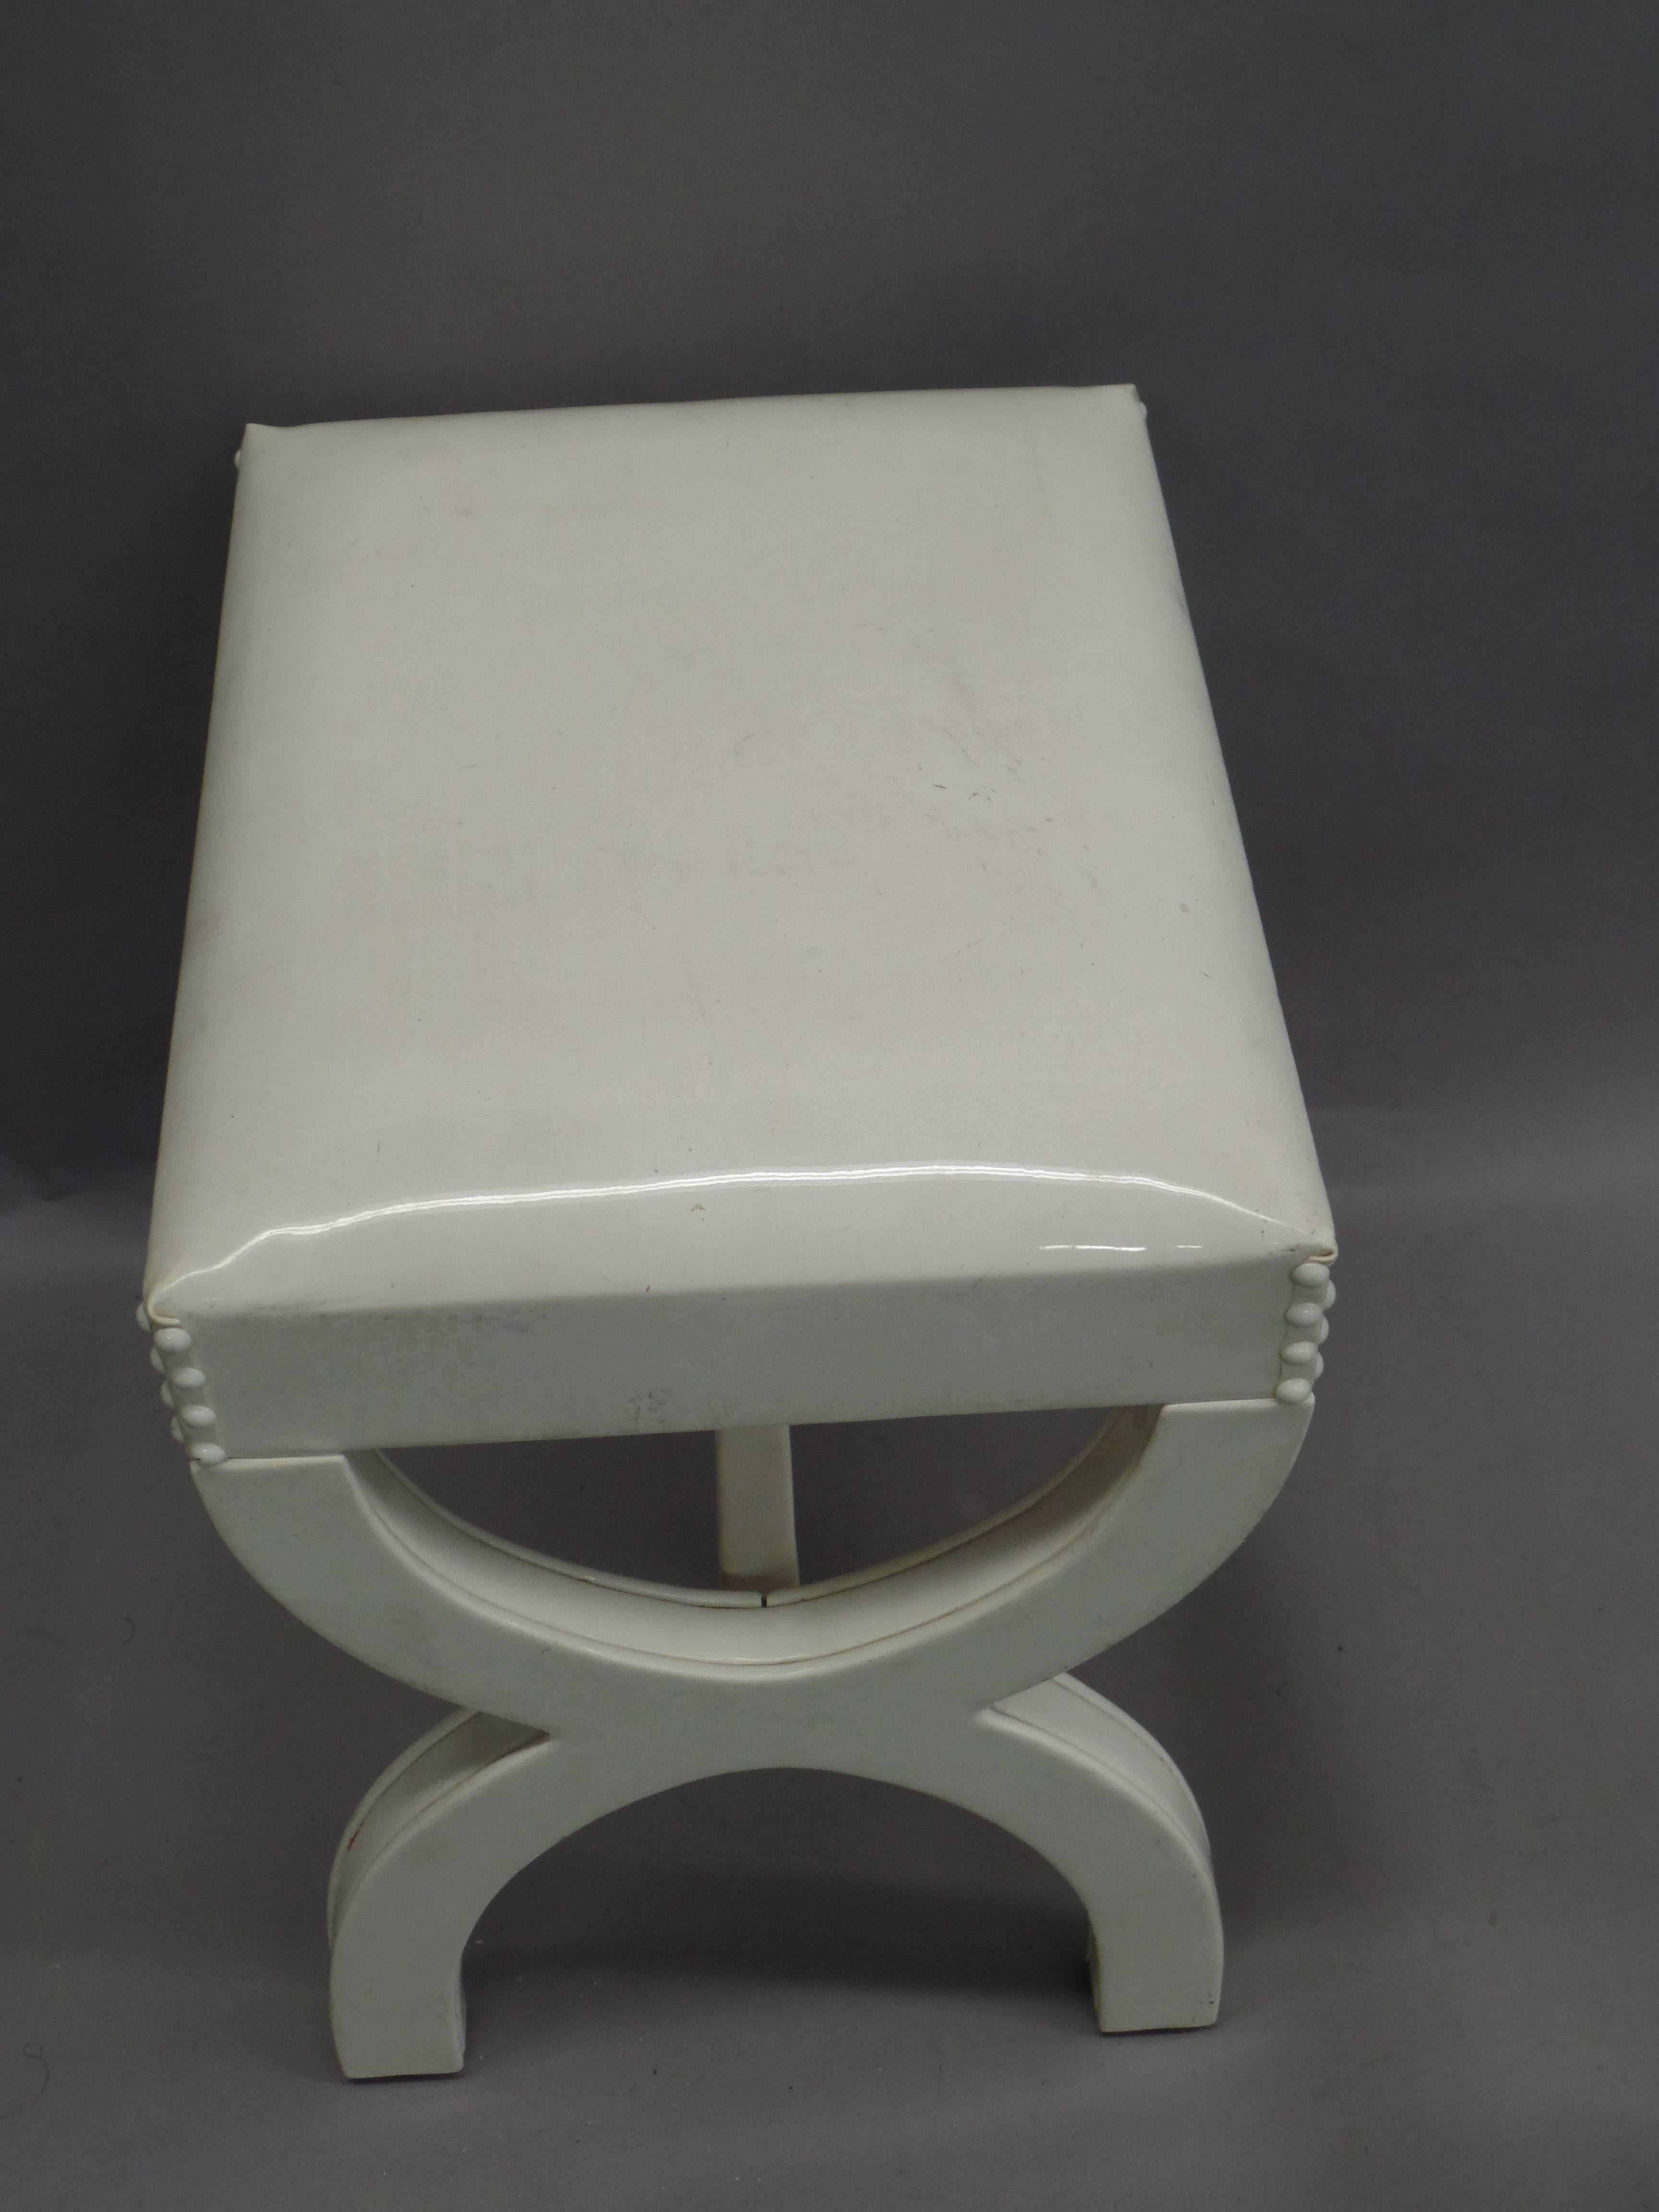 Hand-Crafted French Modern Neoclassical Bench in White Simi-Leather in style of Andre Arbus For Sale